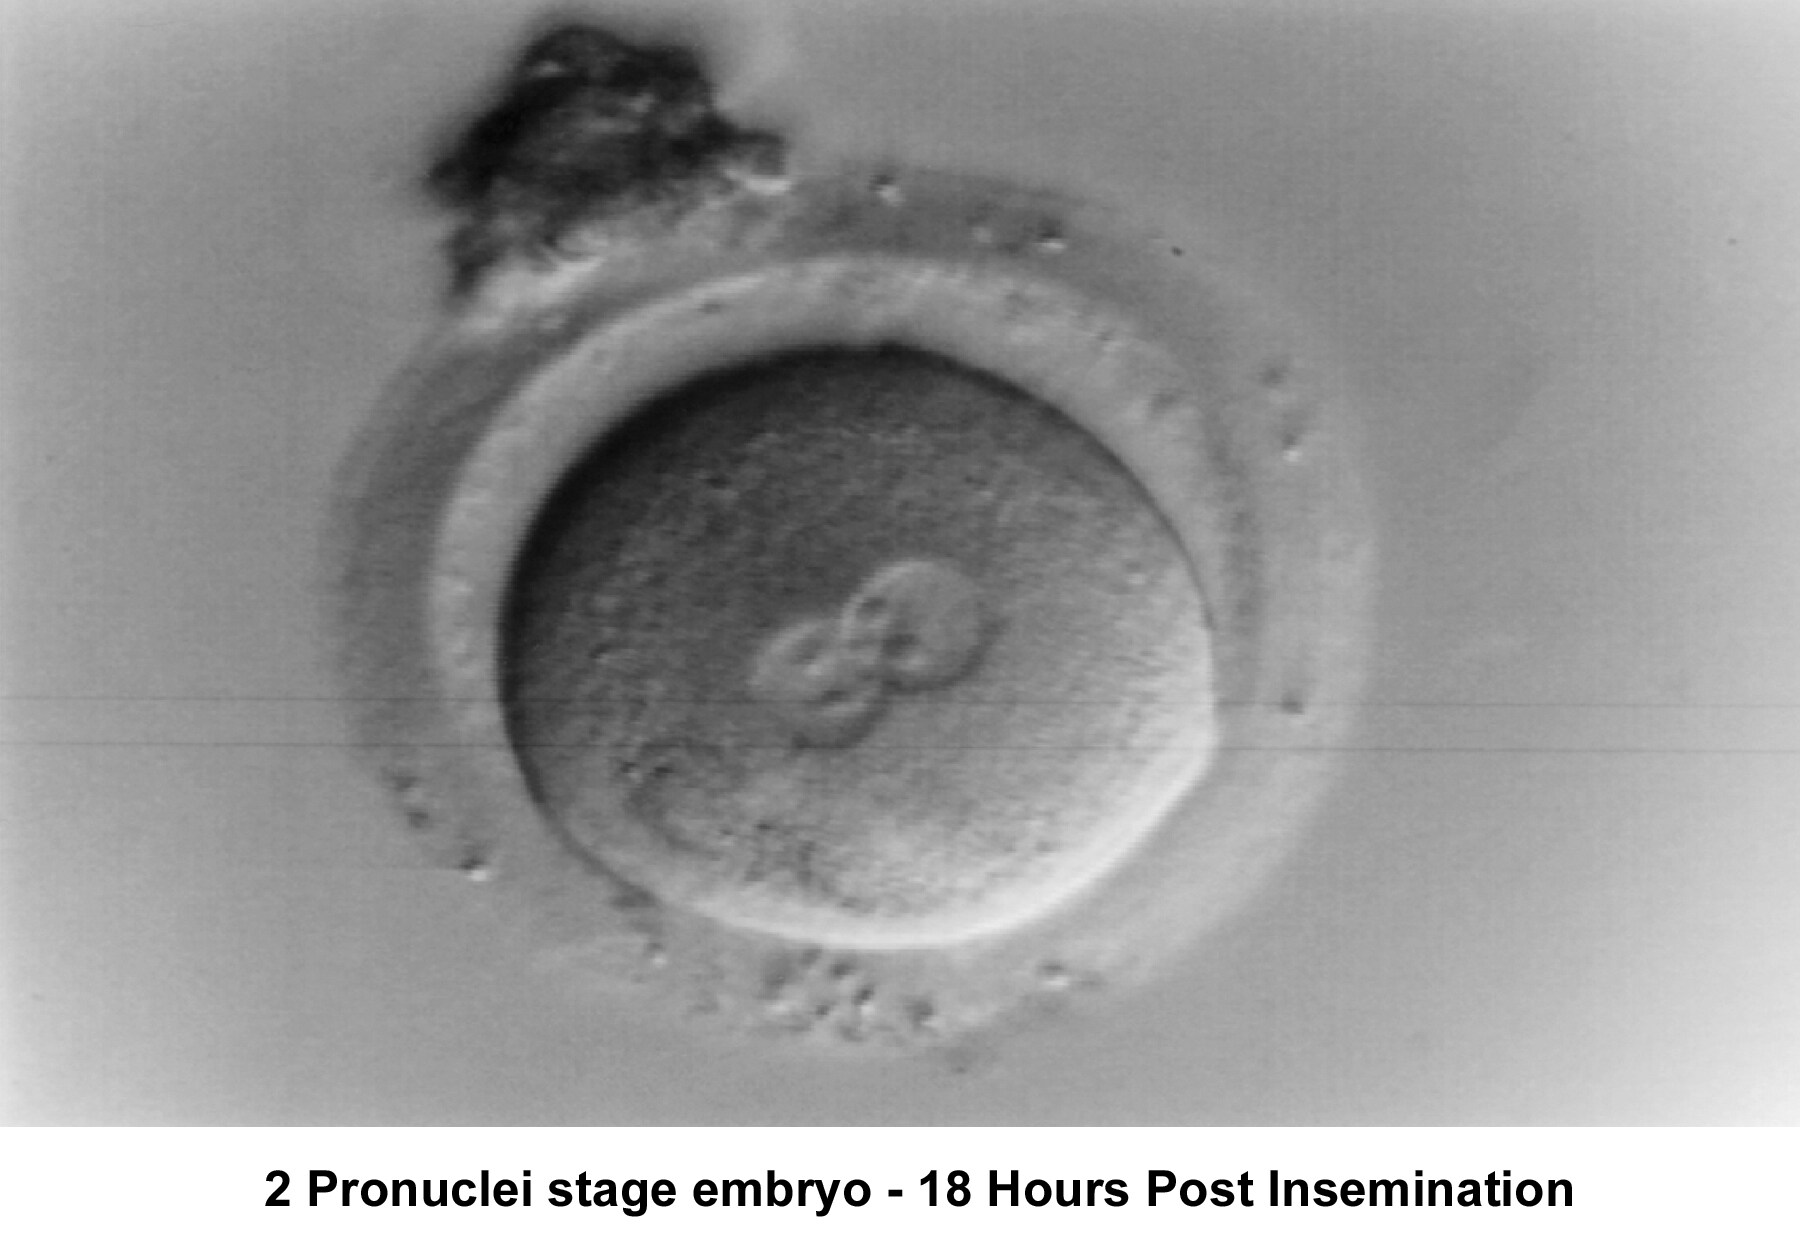 Infertility. Two-pronuclei stage embryo - Eightee...